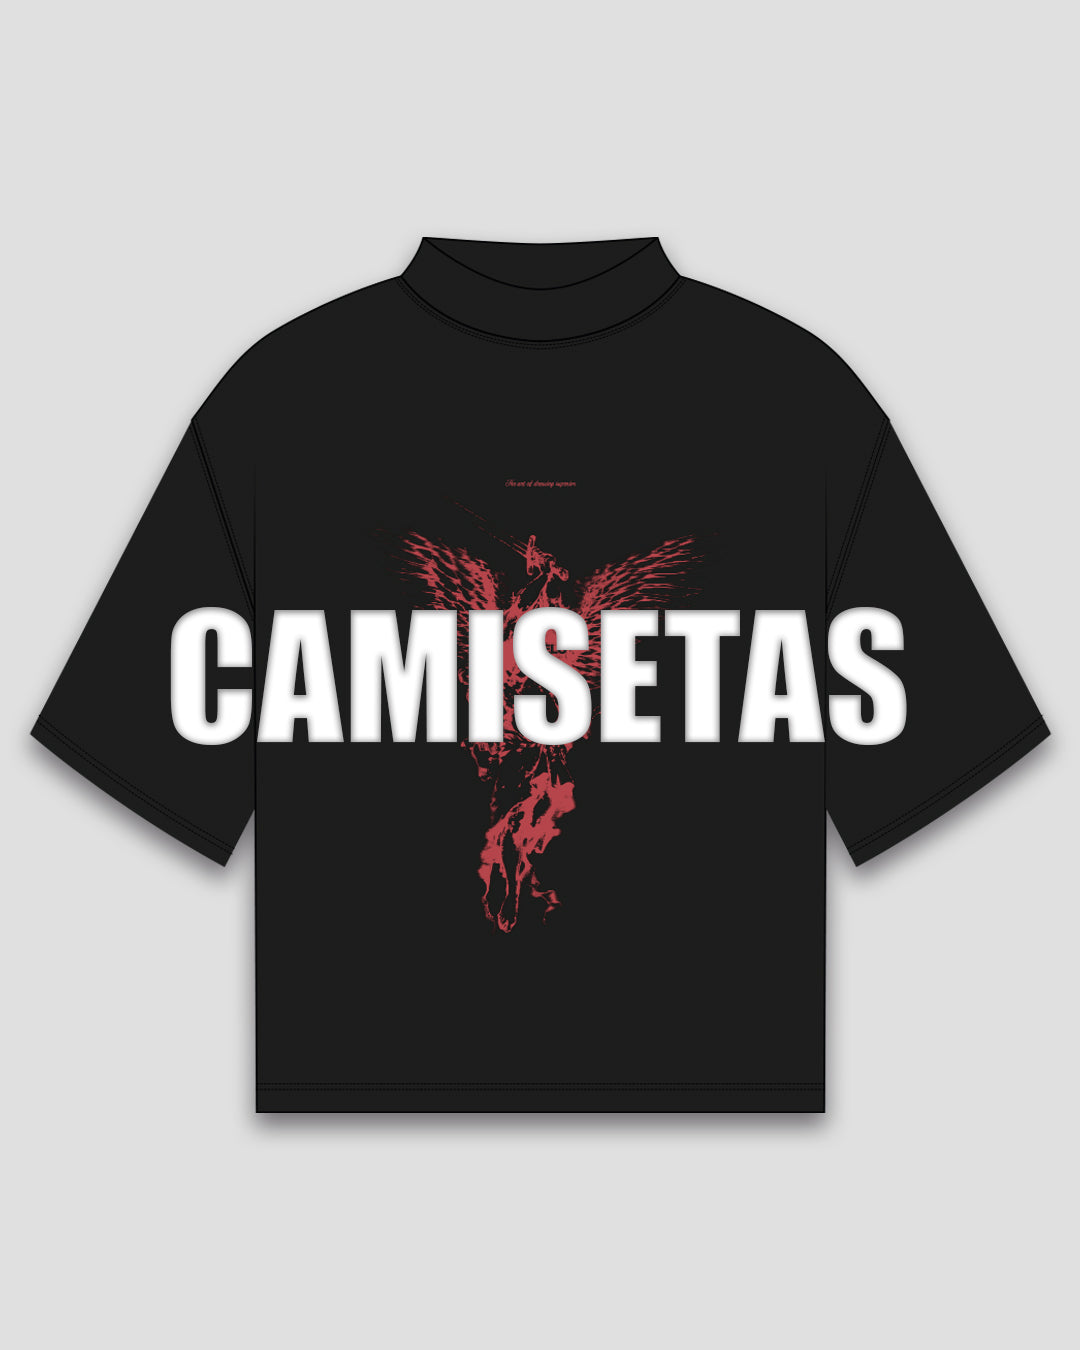 https://www.angeloclo.com/collections/angel-caido/Camiseta